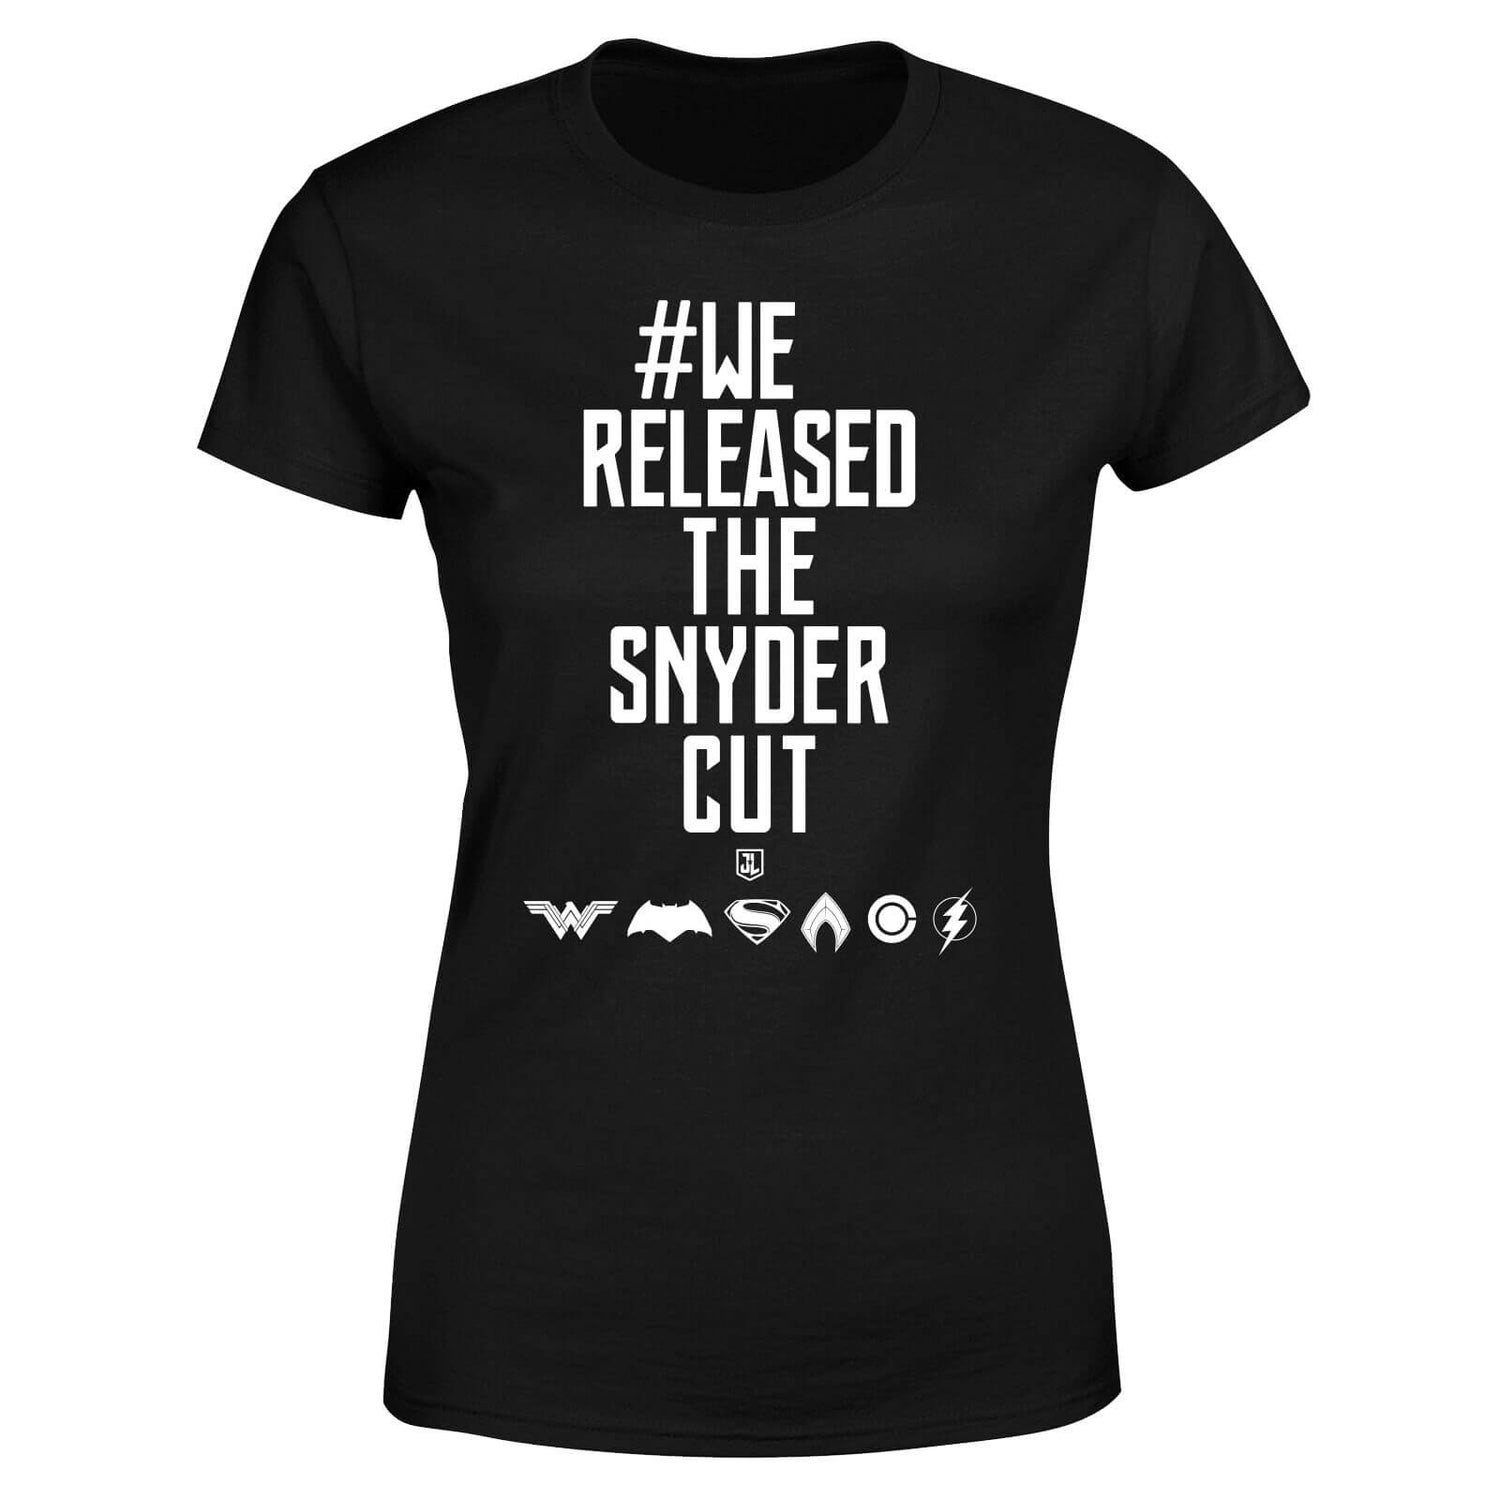 Justice League We Released The Snyder Cut Women's T-Shirt - Black